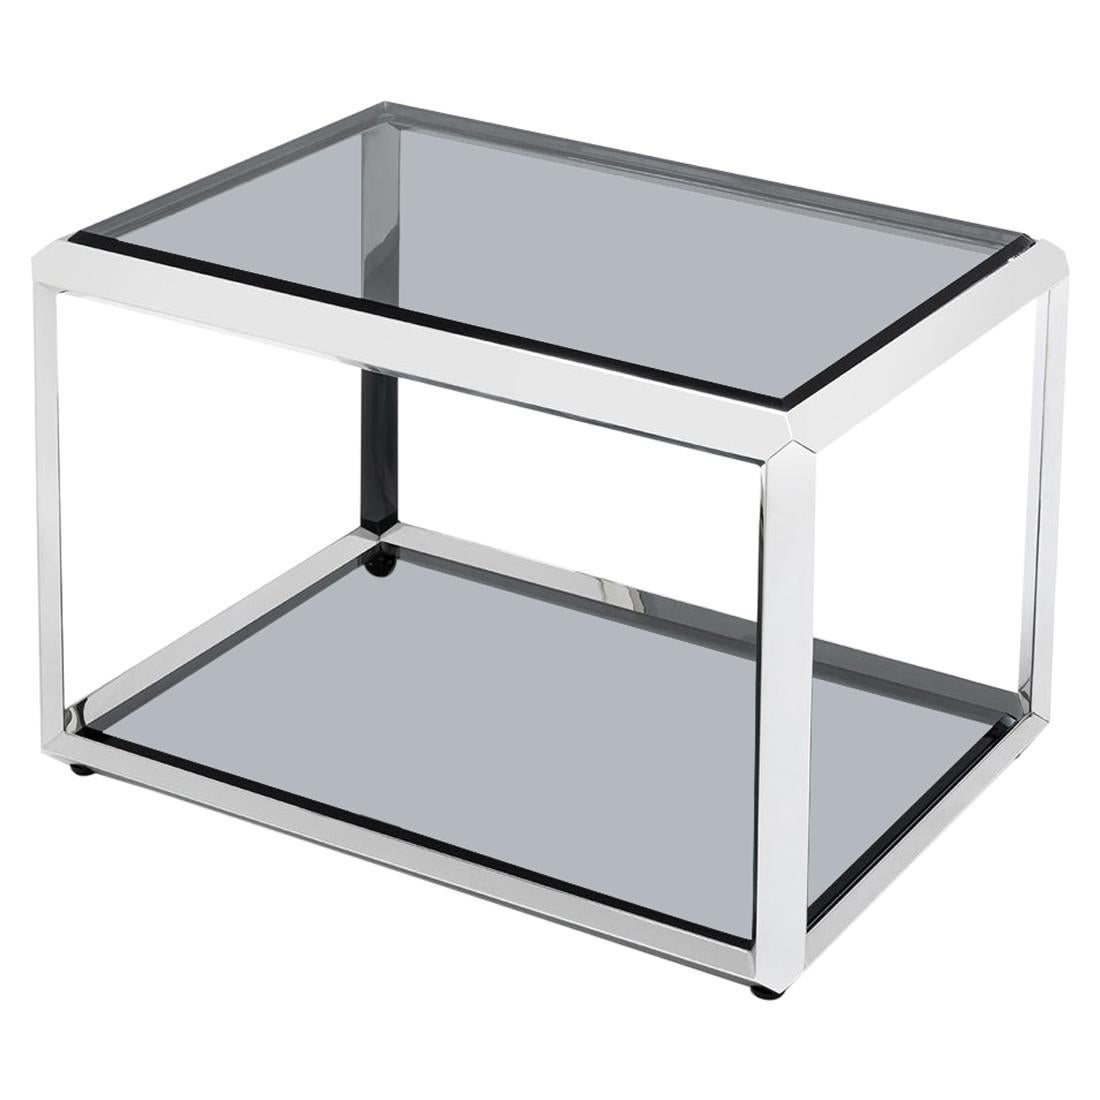 Casiopee Chrome Side Table